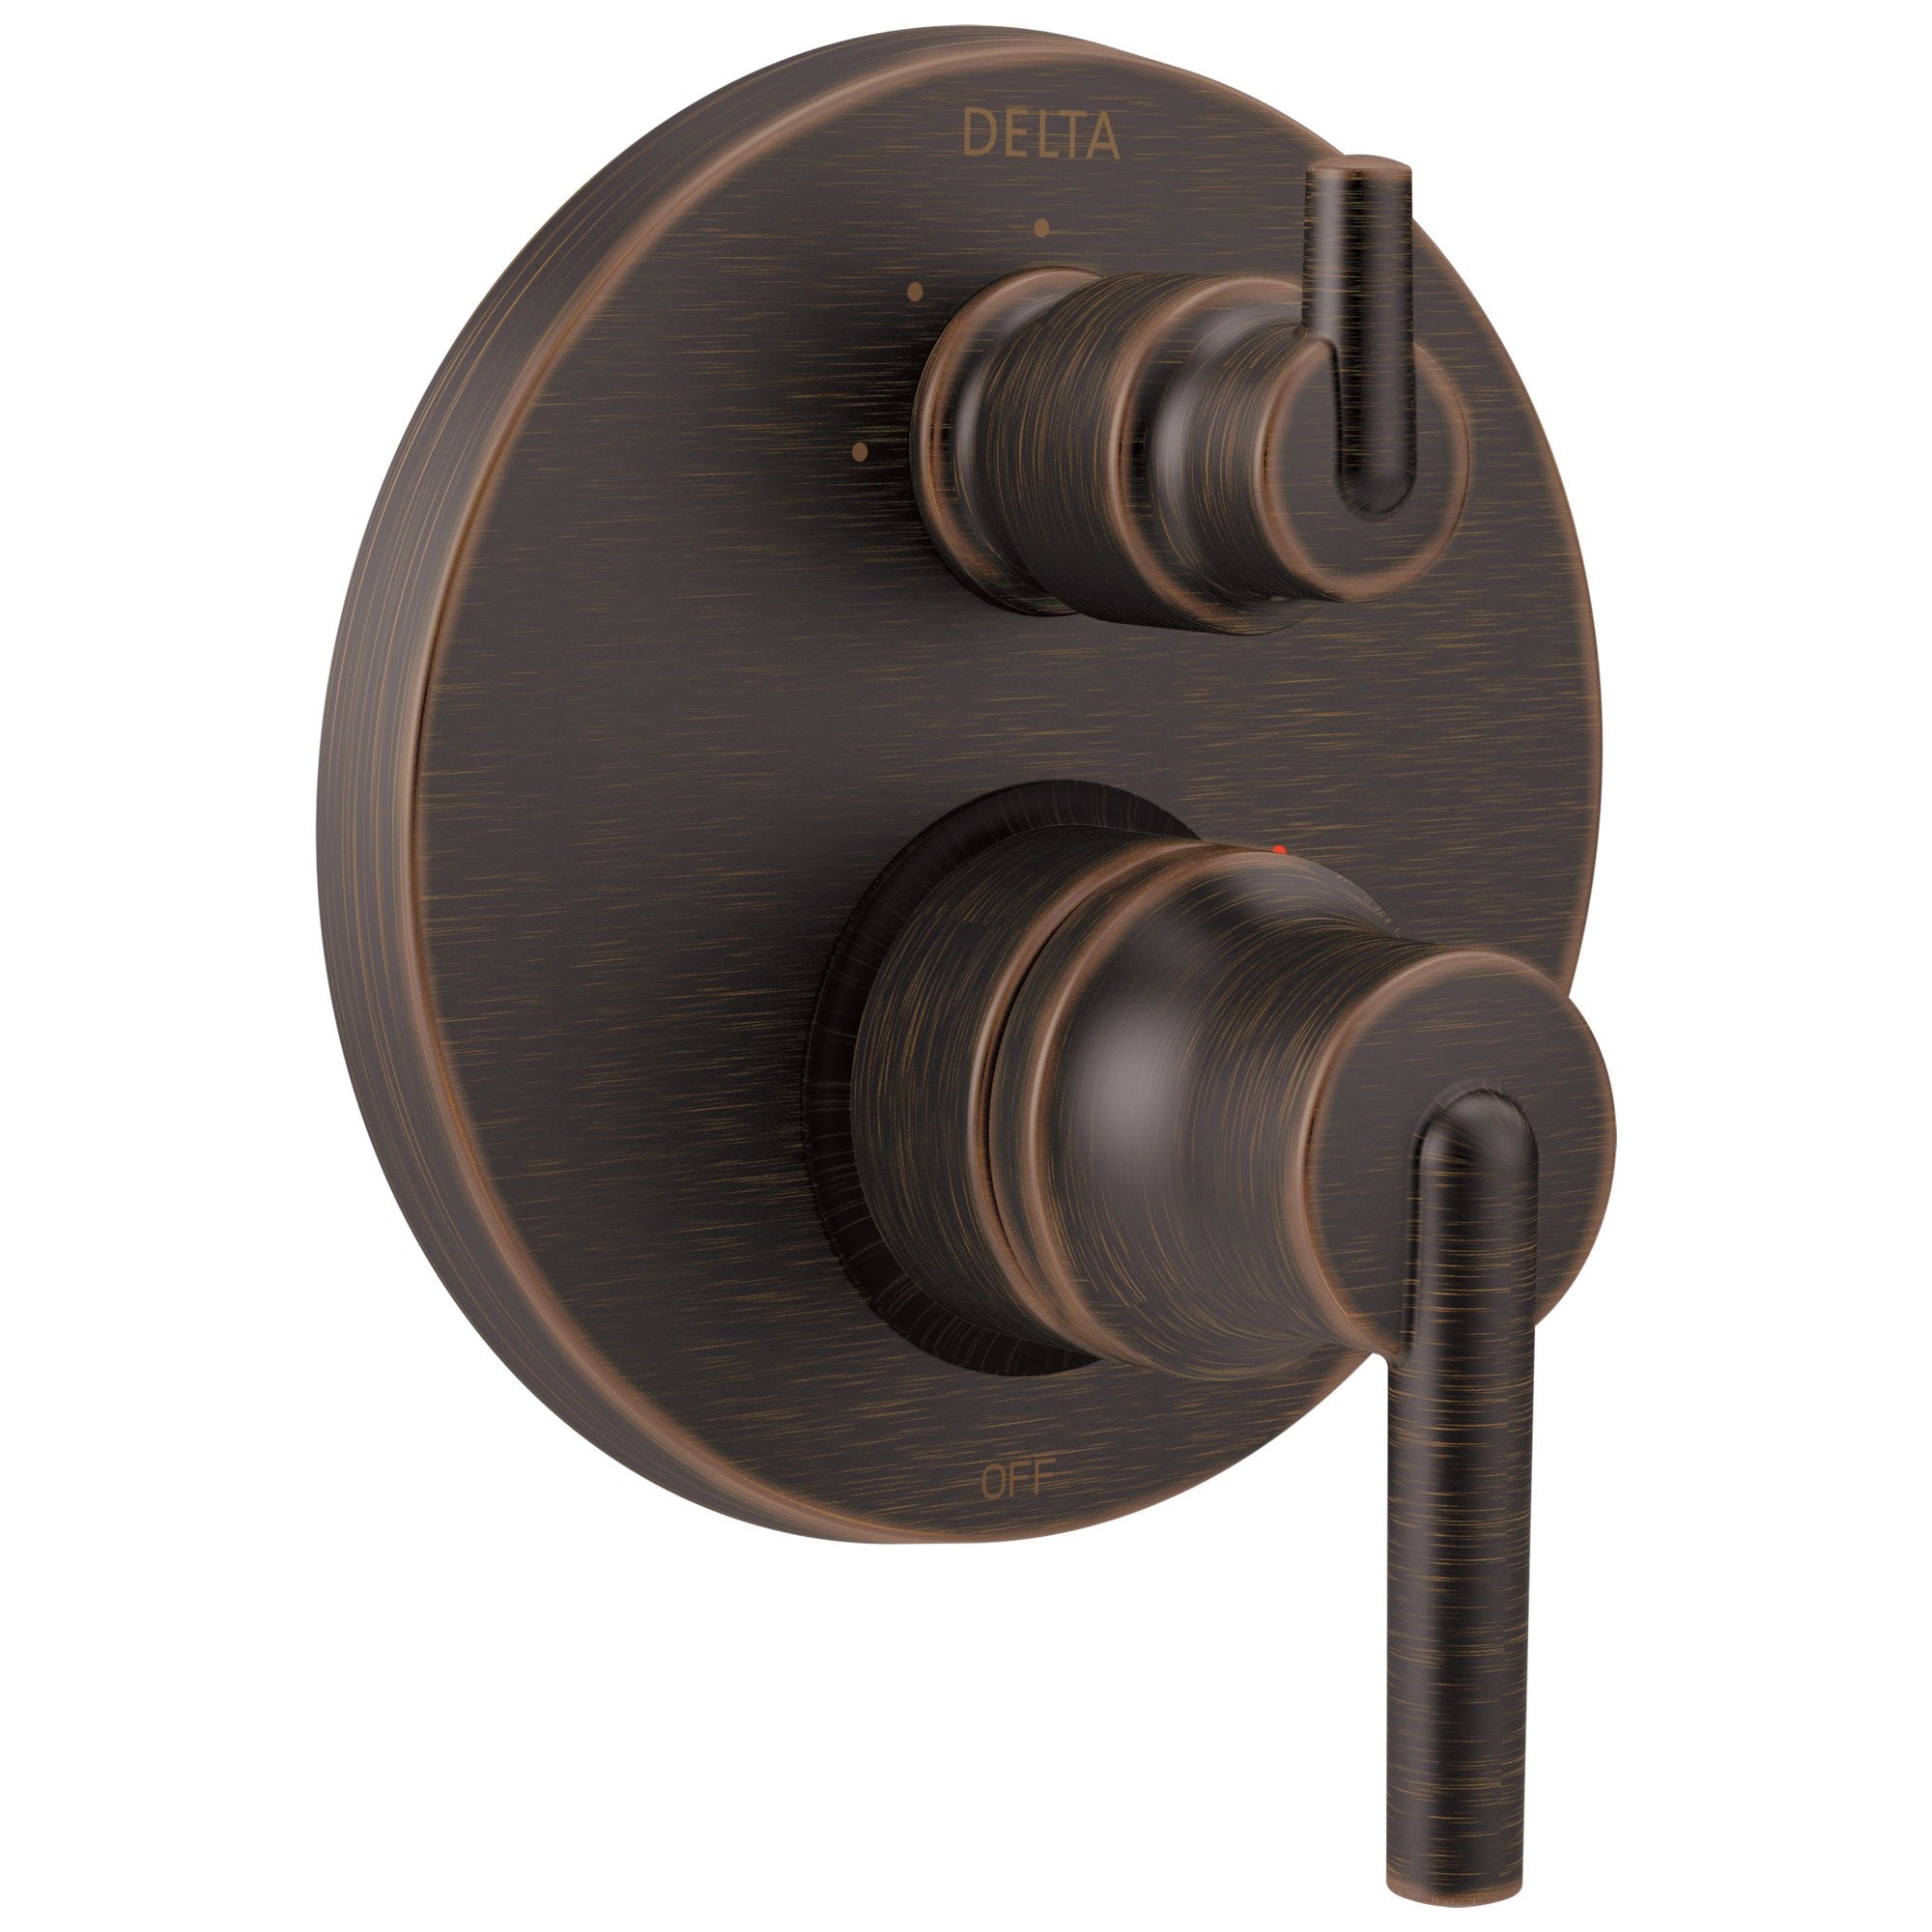 Delta Trinsic Venetian Bronze Shower Faucet Valve Trim Control Handle with 3-Setting Integrated Diverter Includes Trim Kit and Valve without Stops D2216V